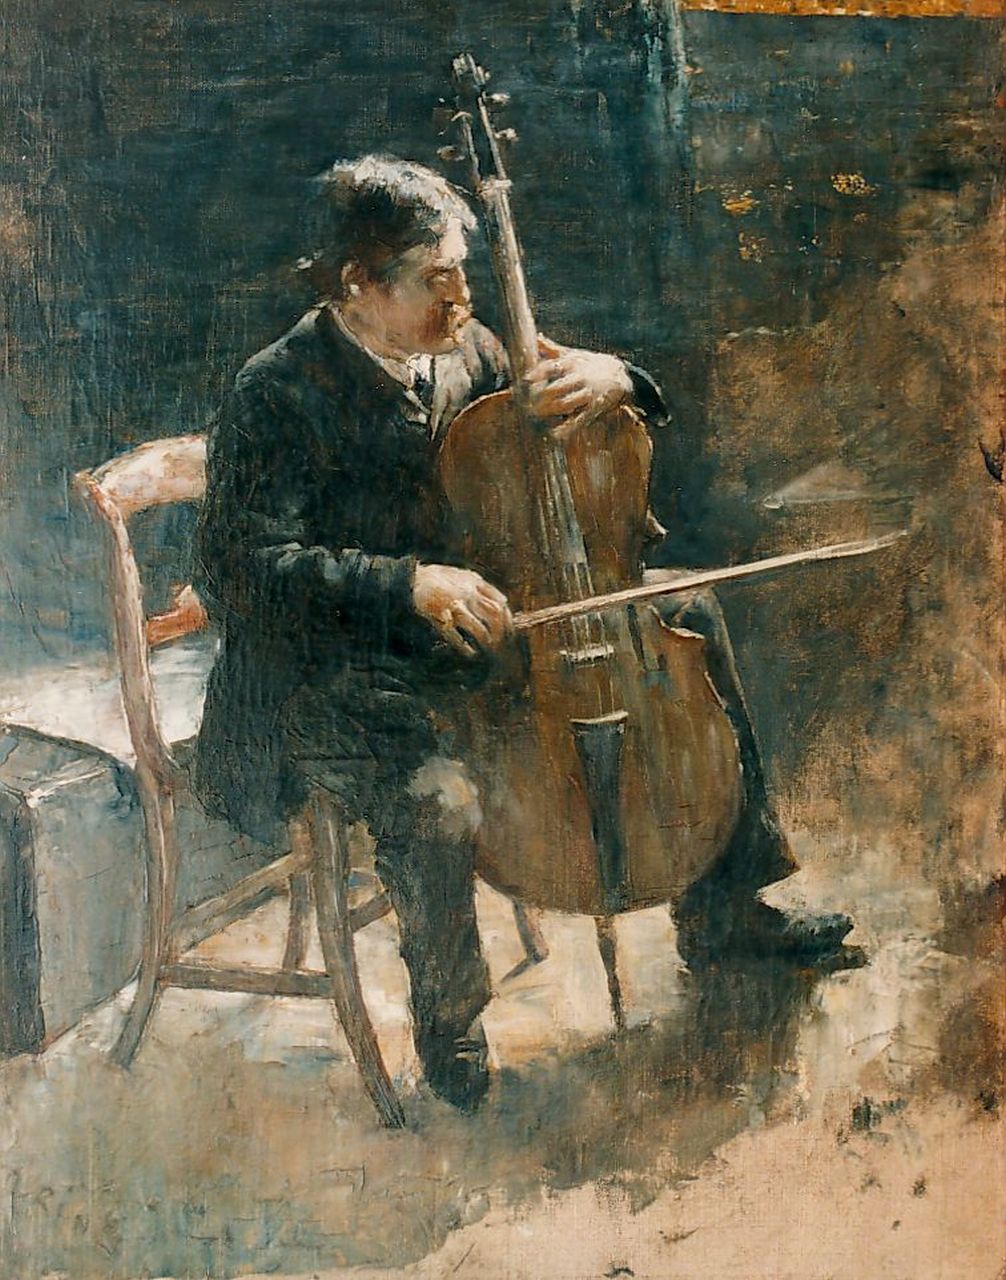 Rink P.Ph.  | Paulus Philippus 'Paul' Rink, The cello-player, oil on canvas 50.5 x 40.2 cm, signed l.l.